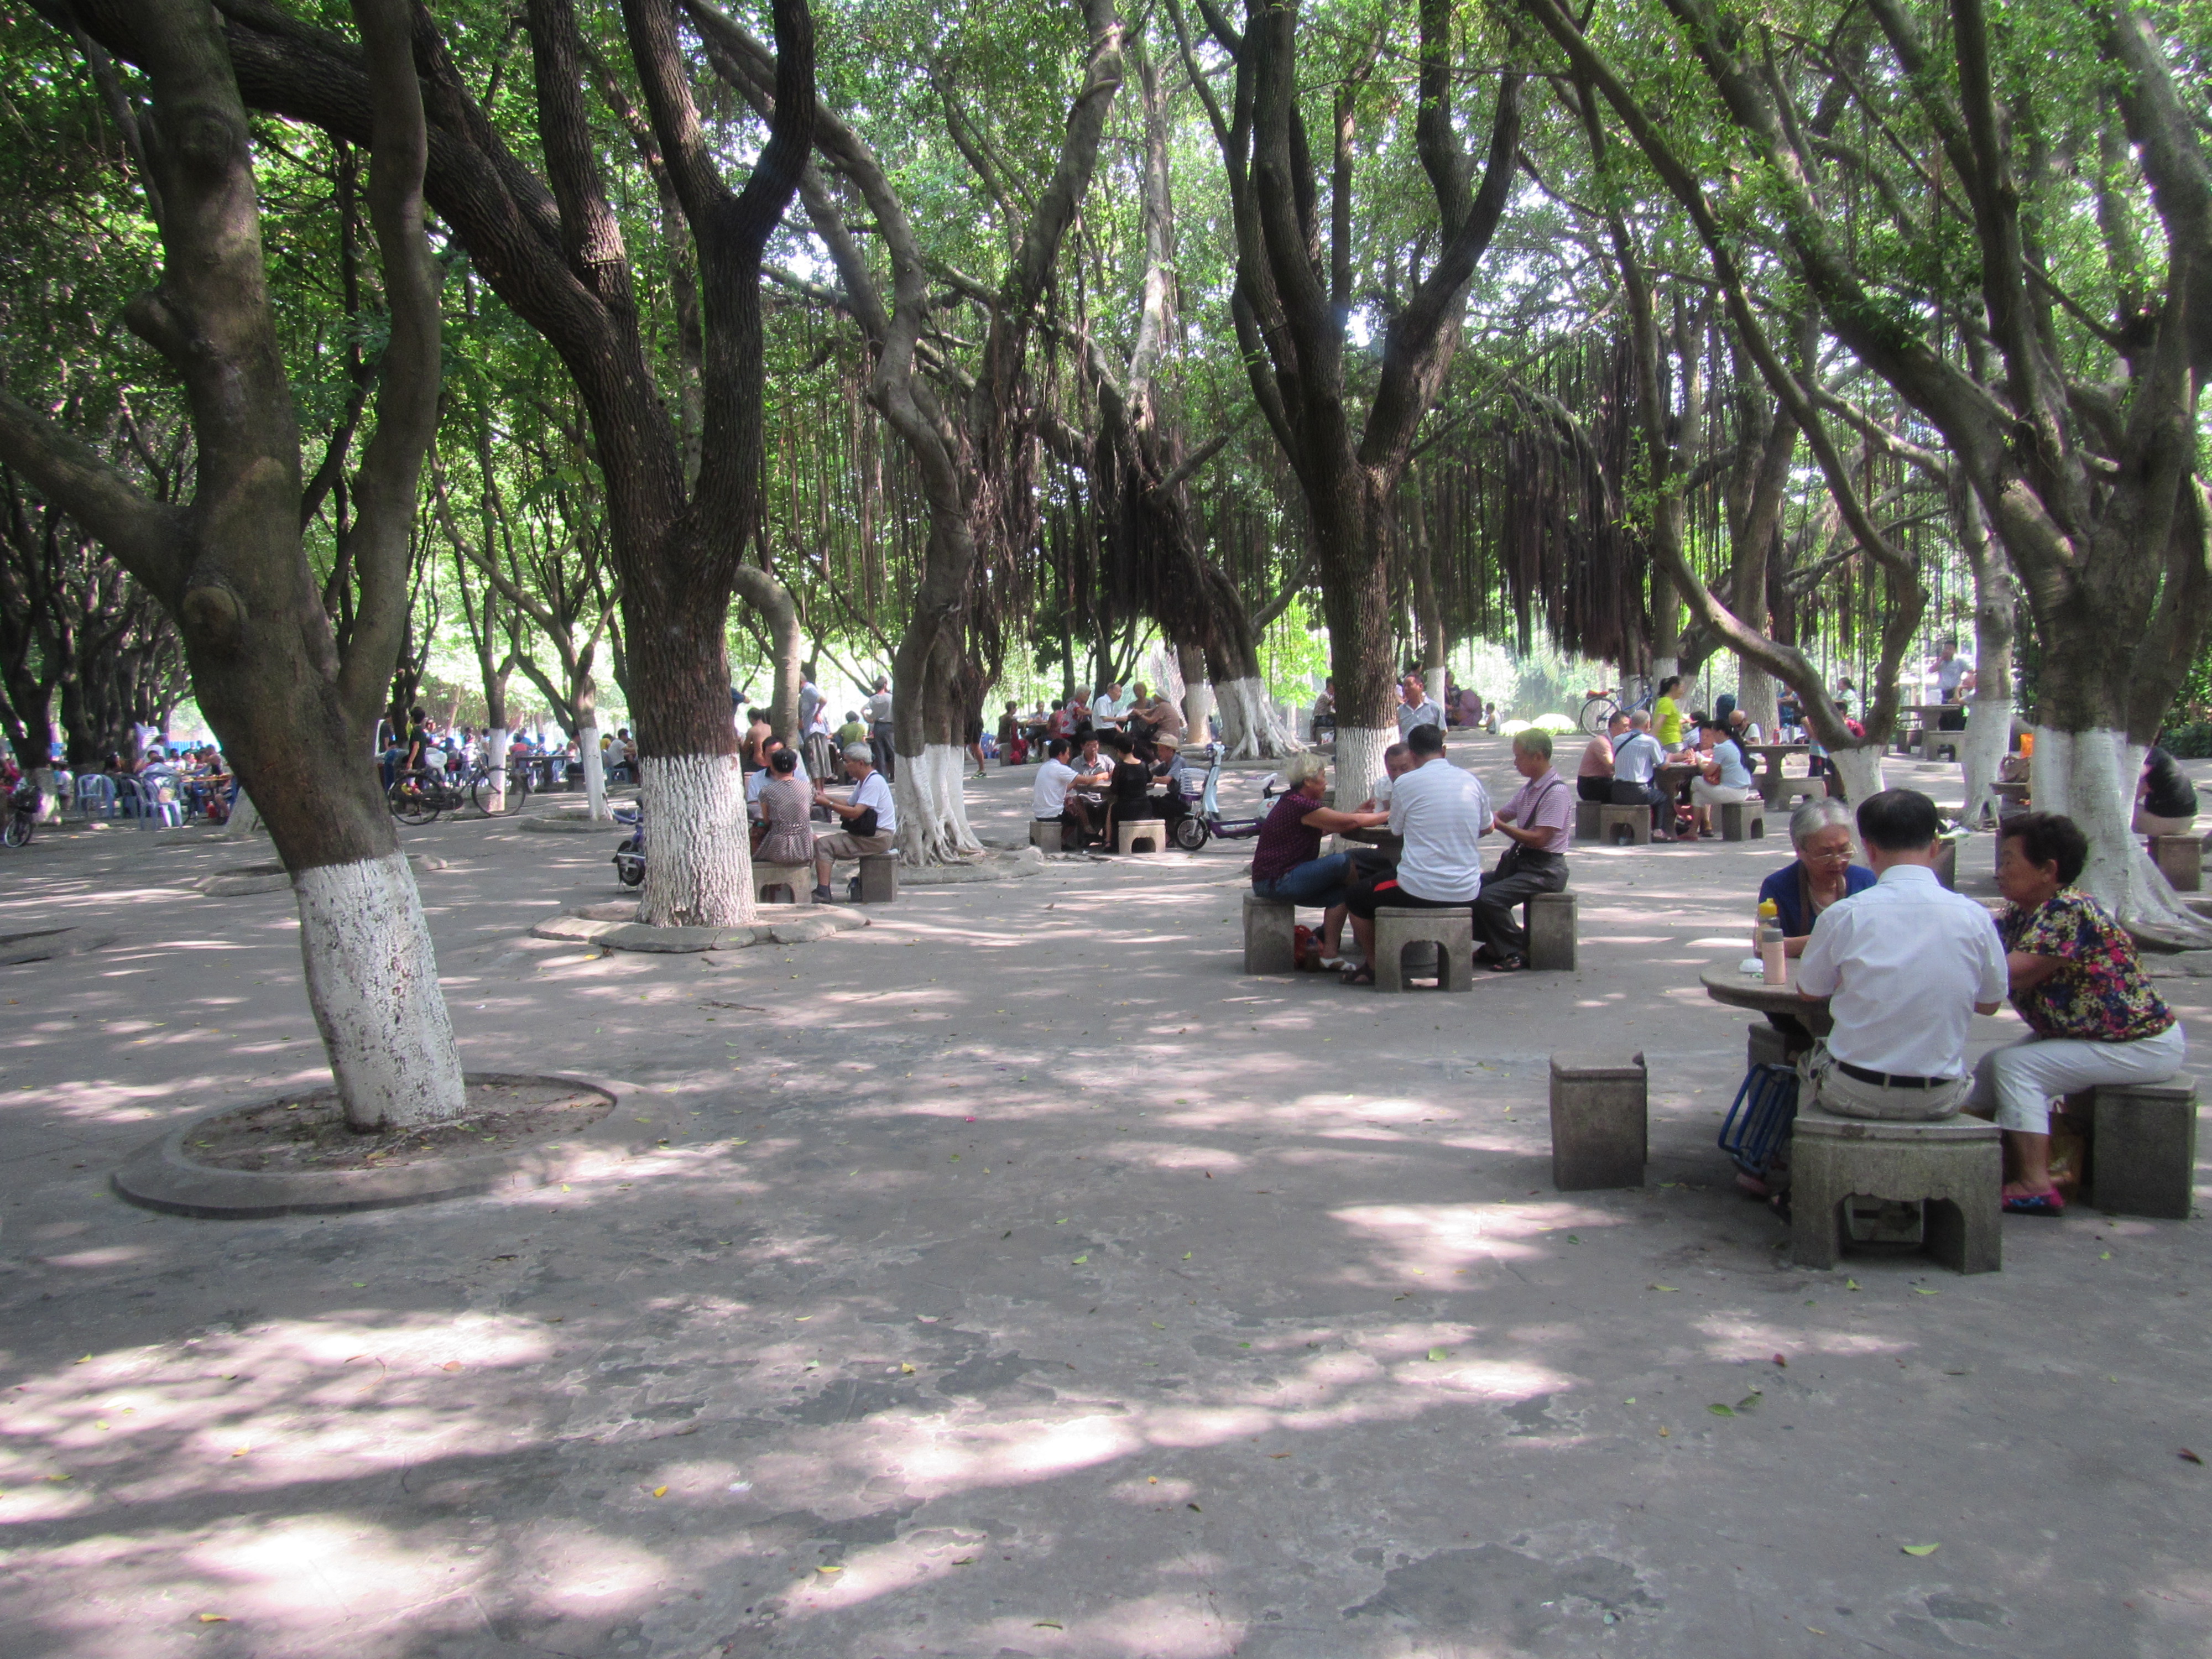 Retirees playing mahjong and card games in the park.  I think this would be a lovely place to spend my retirement!!